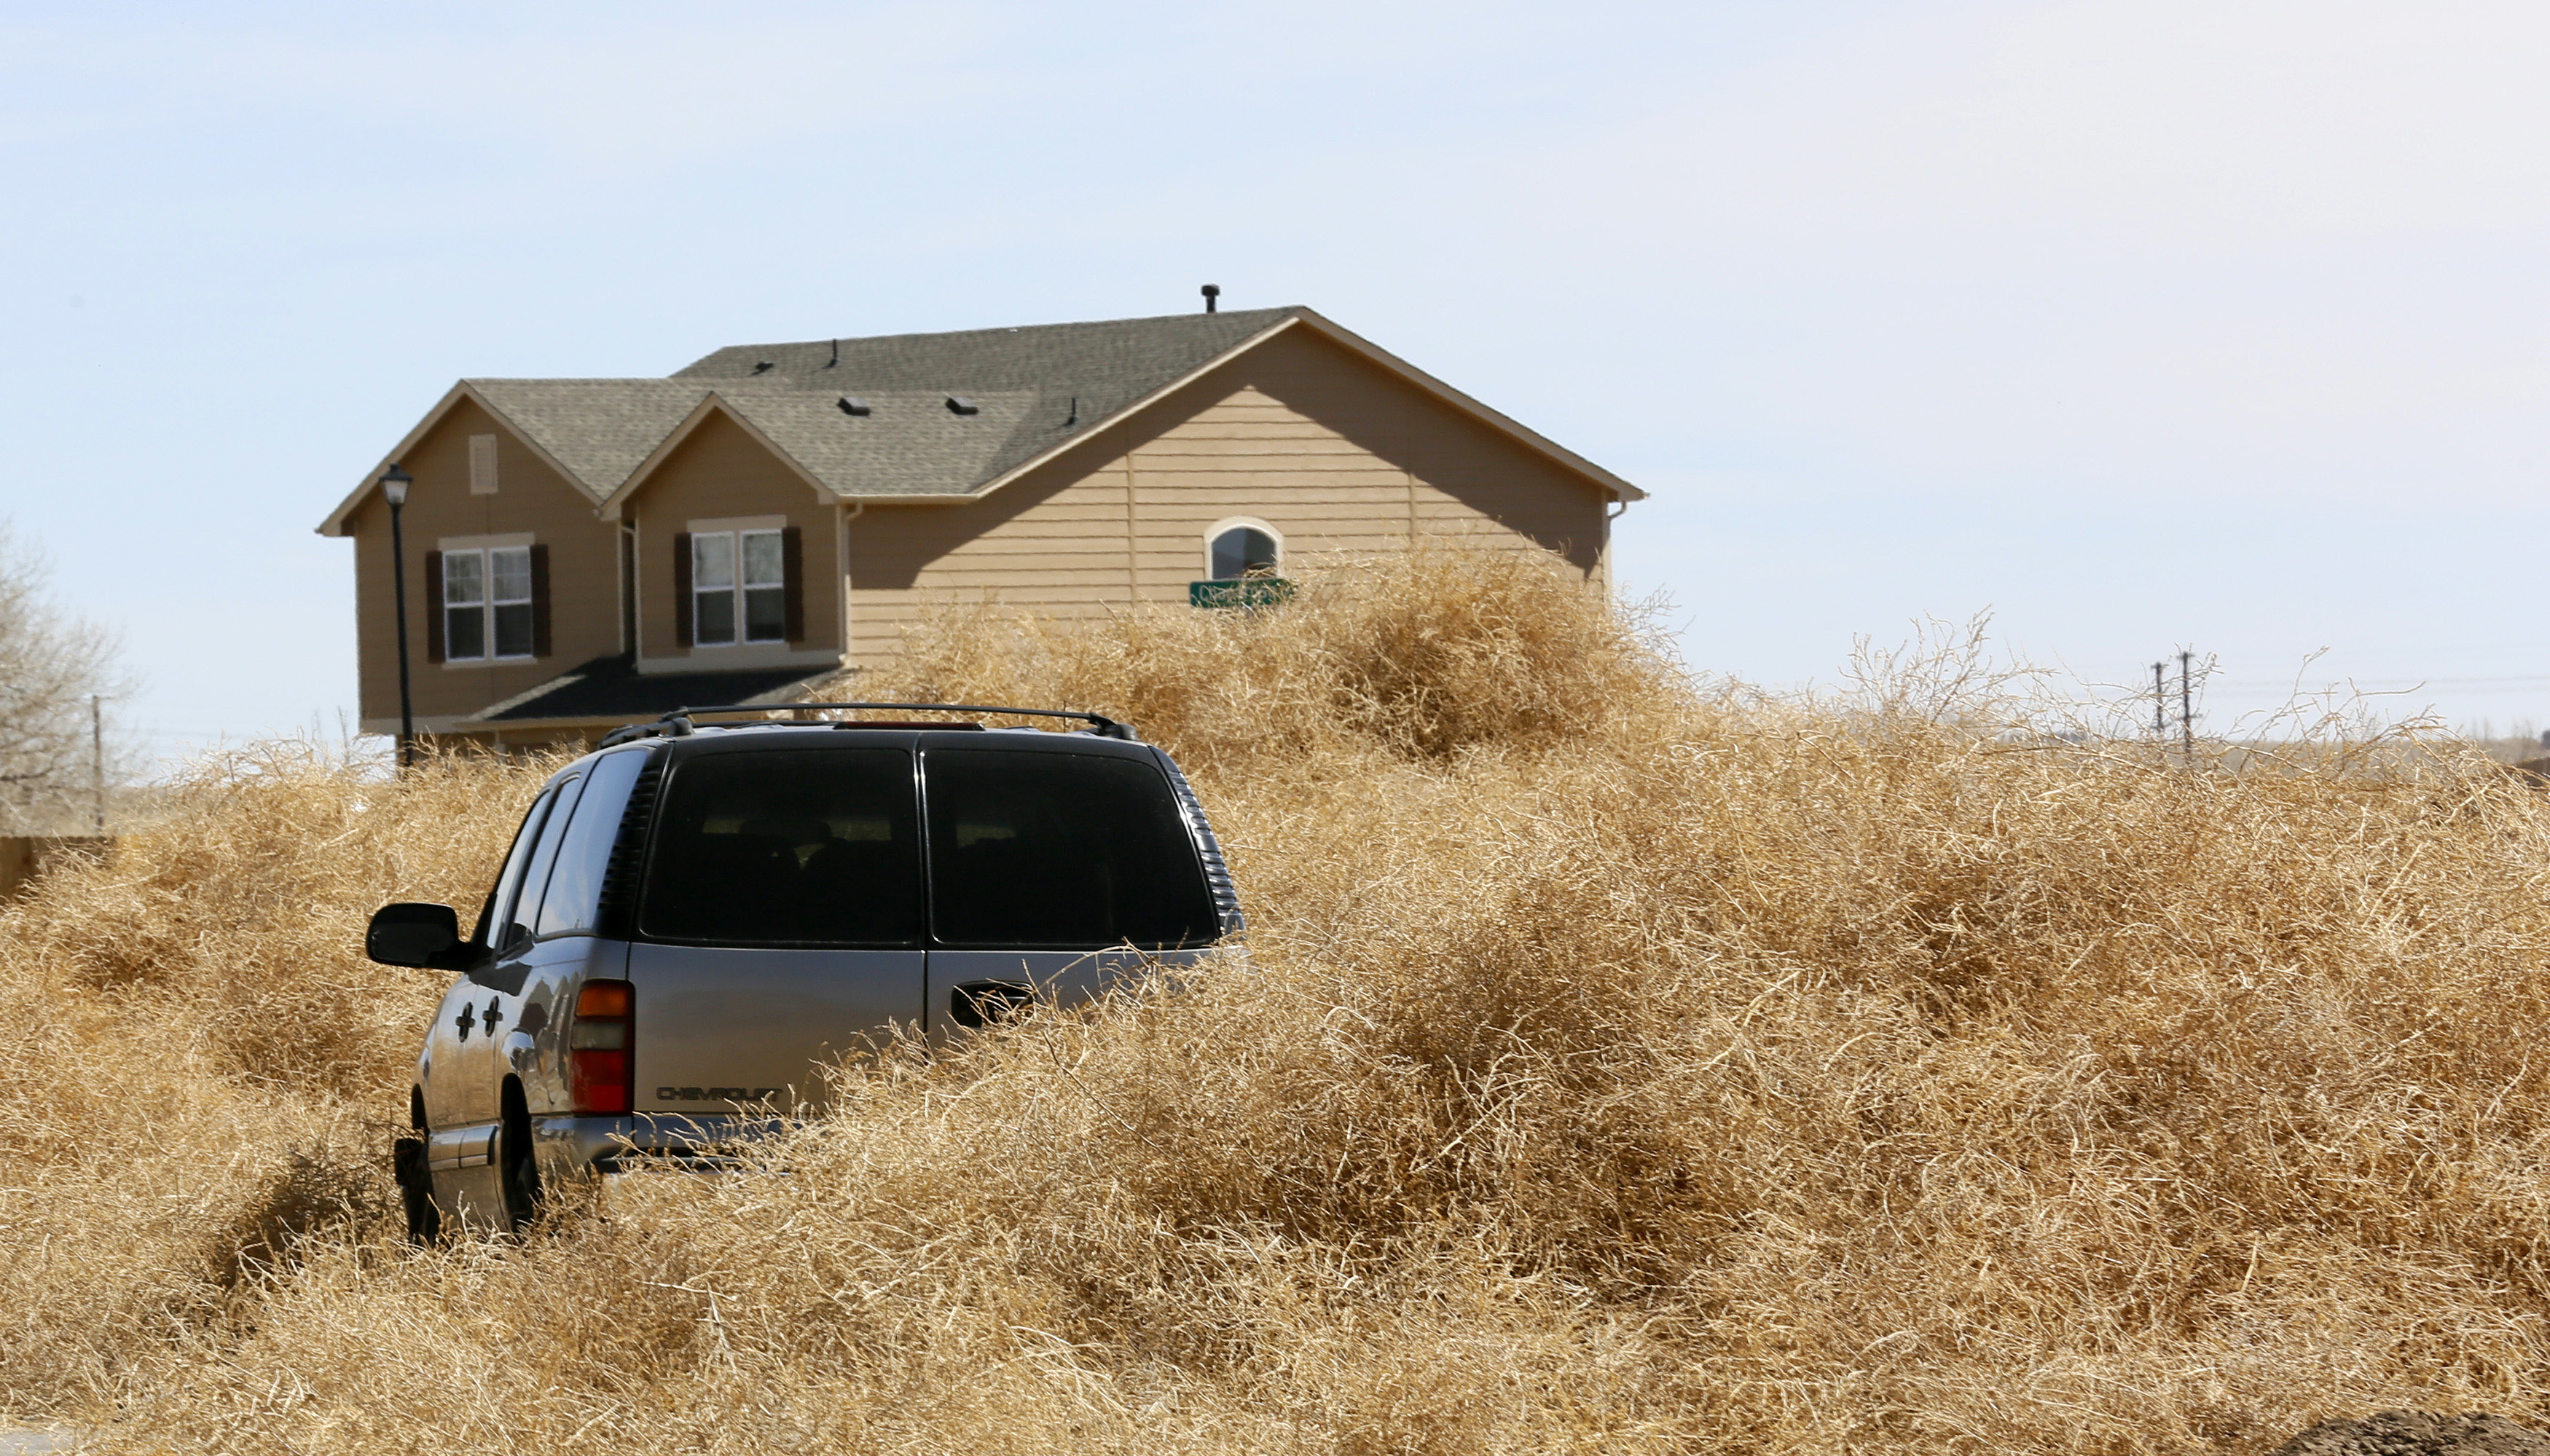 Tumbleweed surrounds a car in Fountain